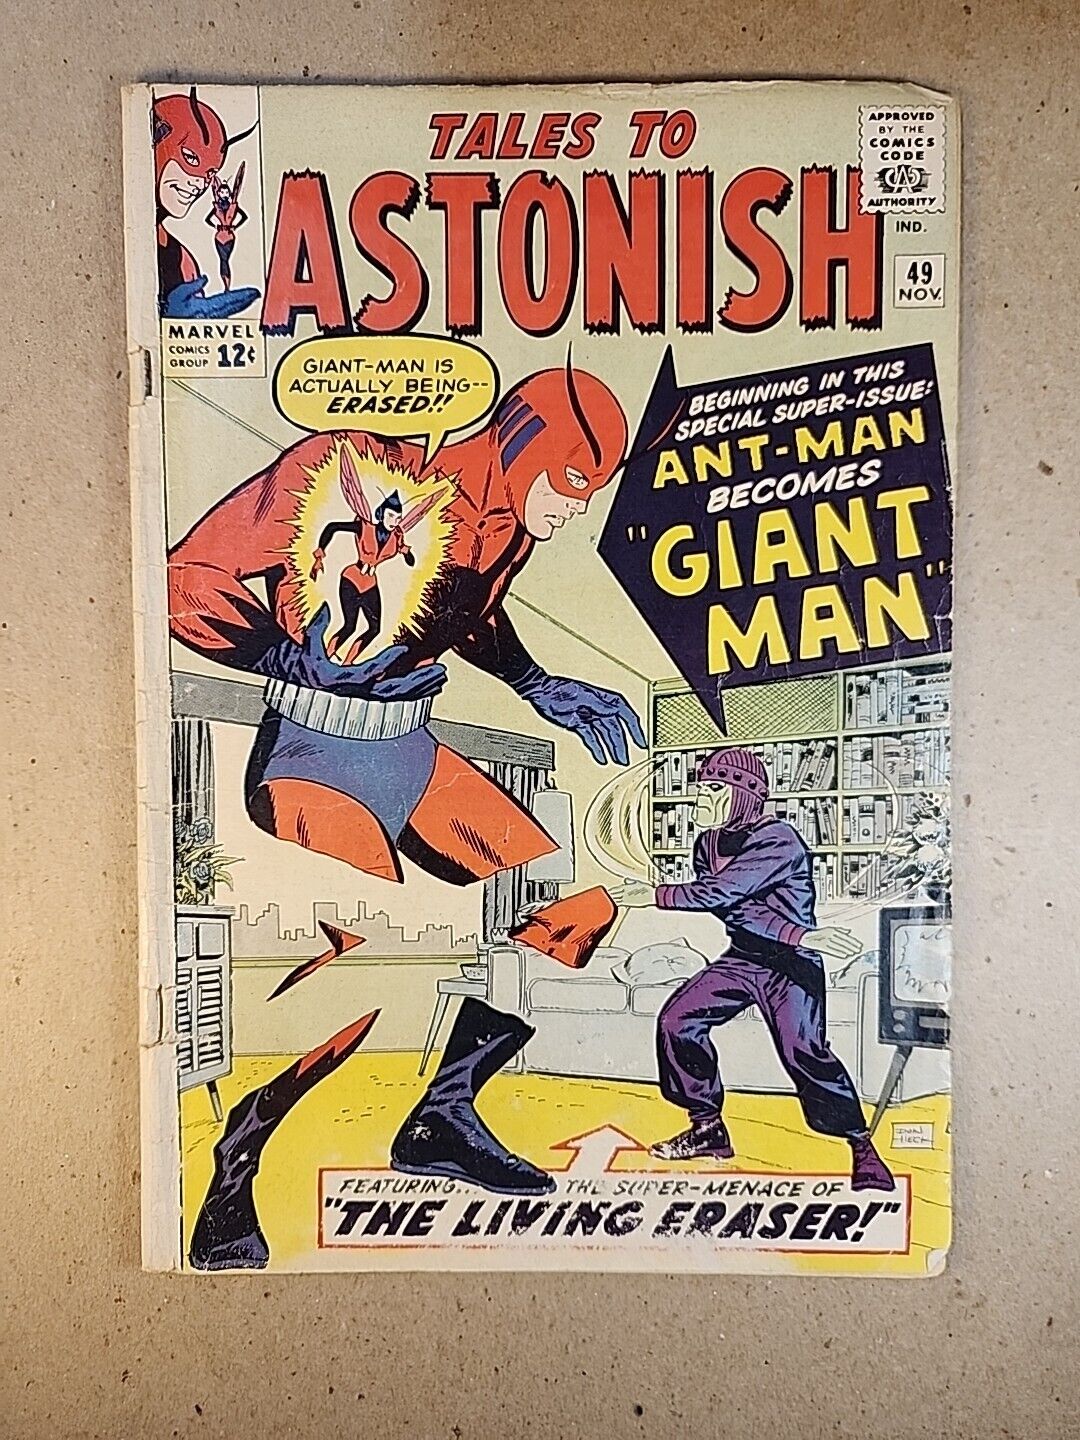 Tales to Astonish 49 Marvel Comics 1963 1st Henry Pym as Giant Man SILVER AGE